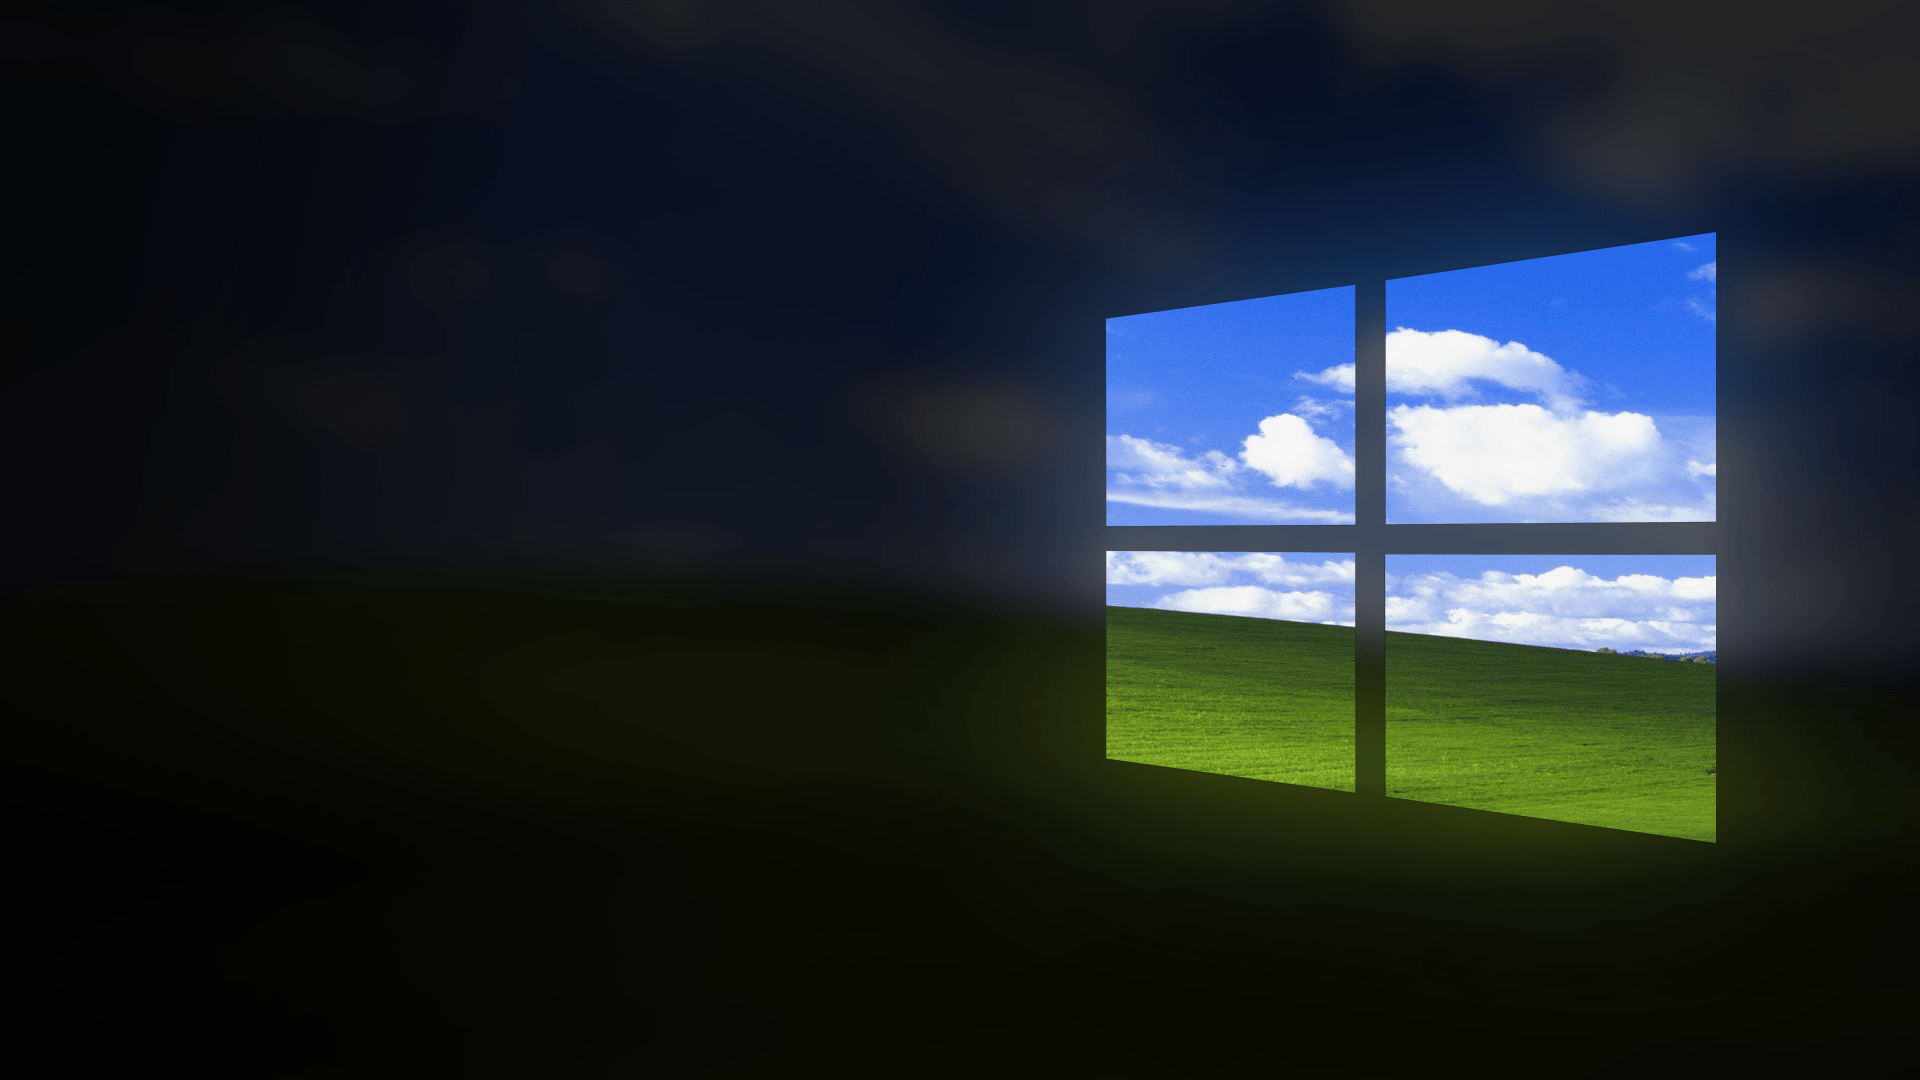 I made a basic Windows 10/XP wallpapers